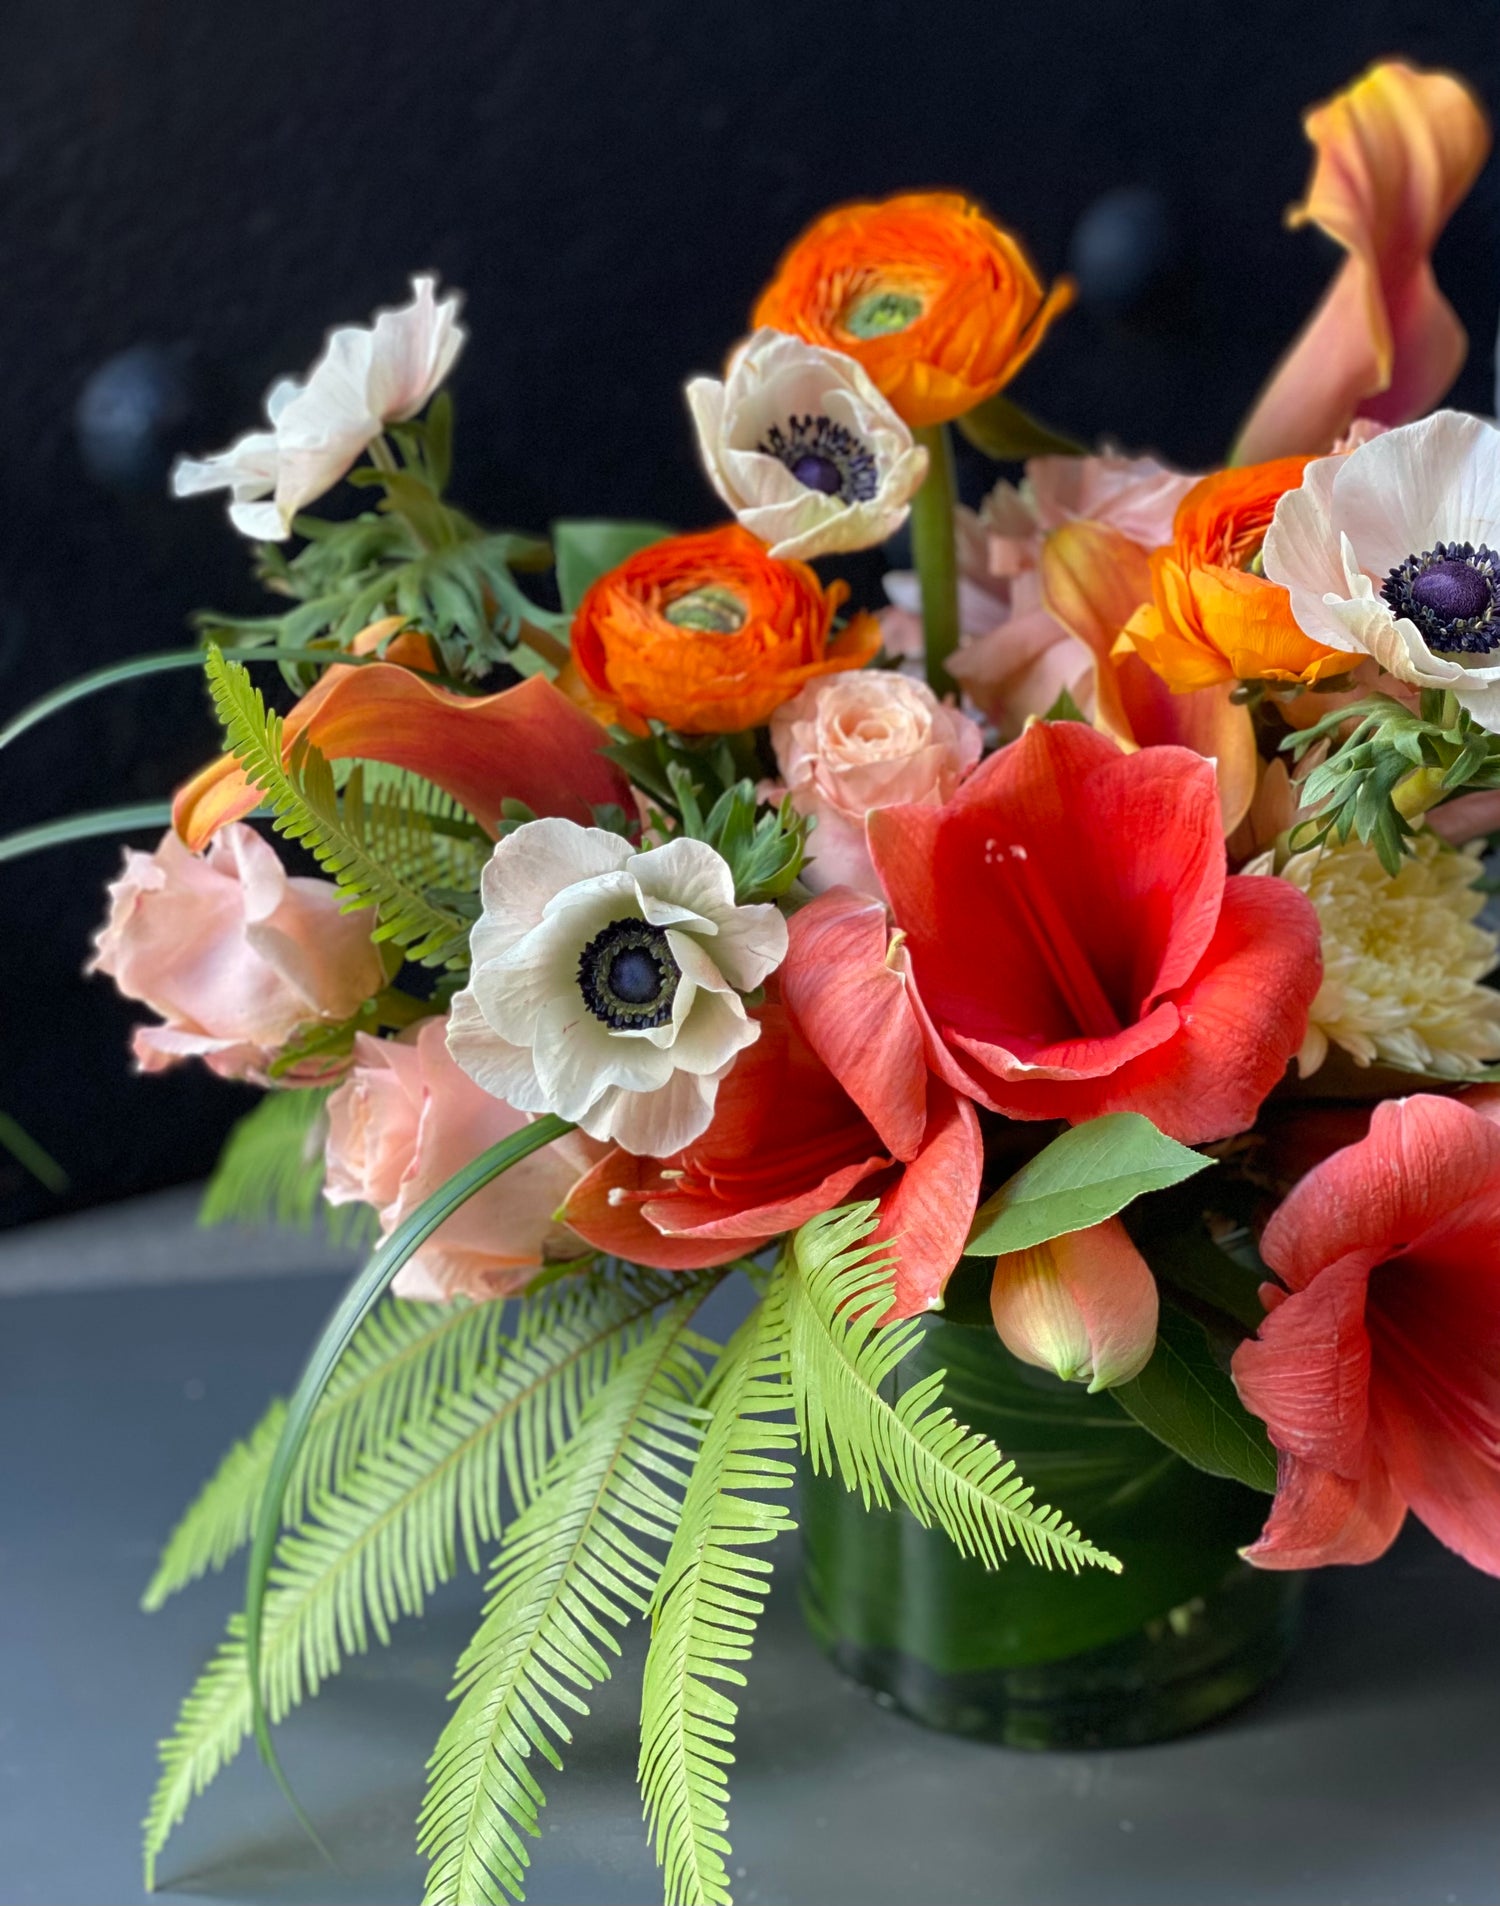 see! Magic Anemones their petals unfold, with rubies flaming, and with living gold. the arrangement engages guests in the magical worlds of the elegant ranunculus and belladonna lilies. 